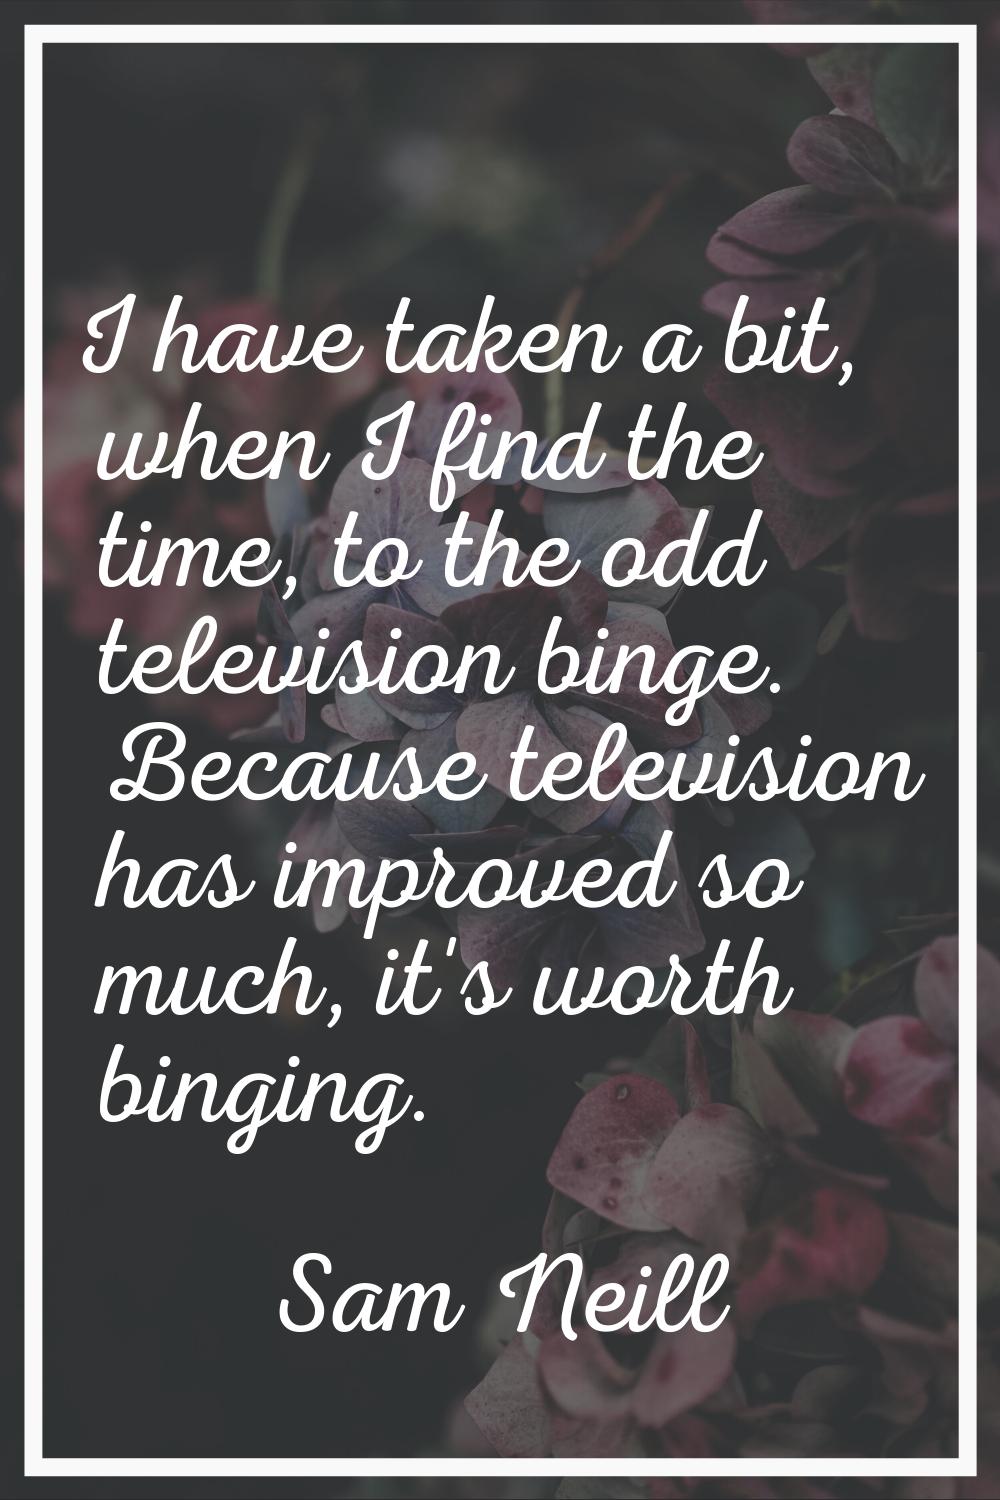 I have taken a bit, when I find the time, to the odd television binge. Because television has impro